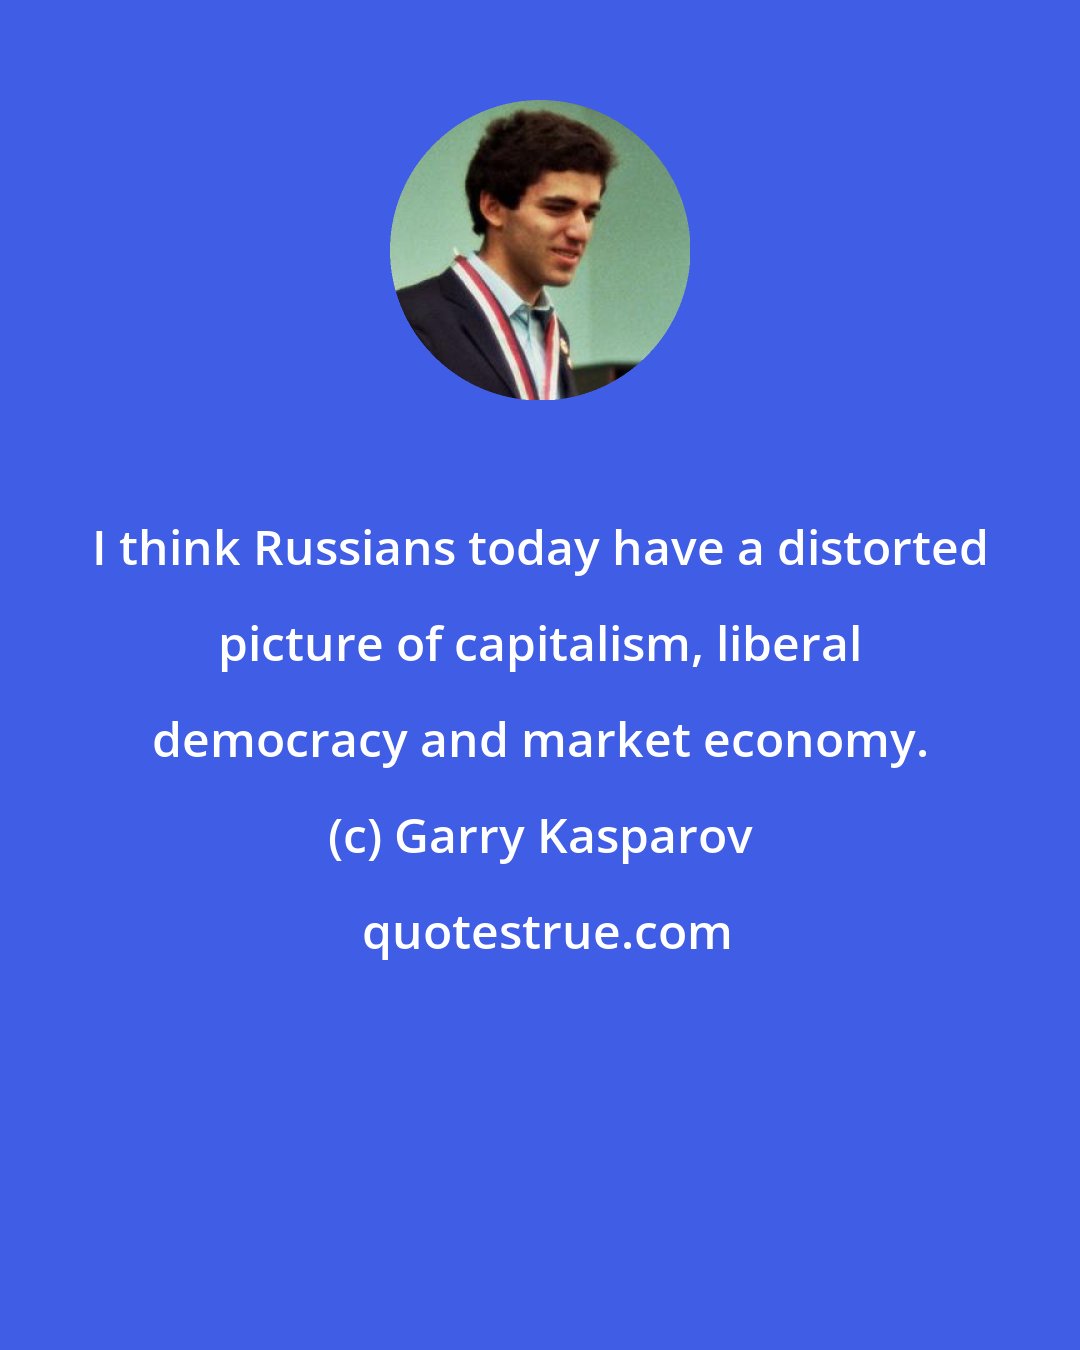 Garry Kasparov: I think Russians today have a distorted picture of capitalism, liberal democracy and market economy.